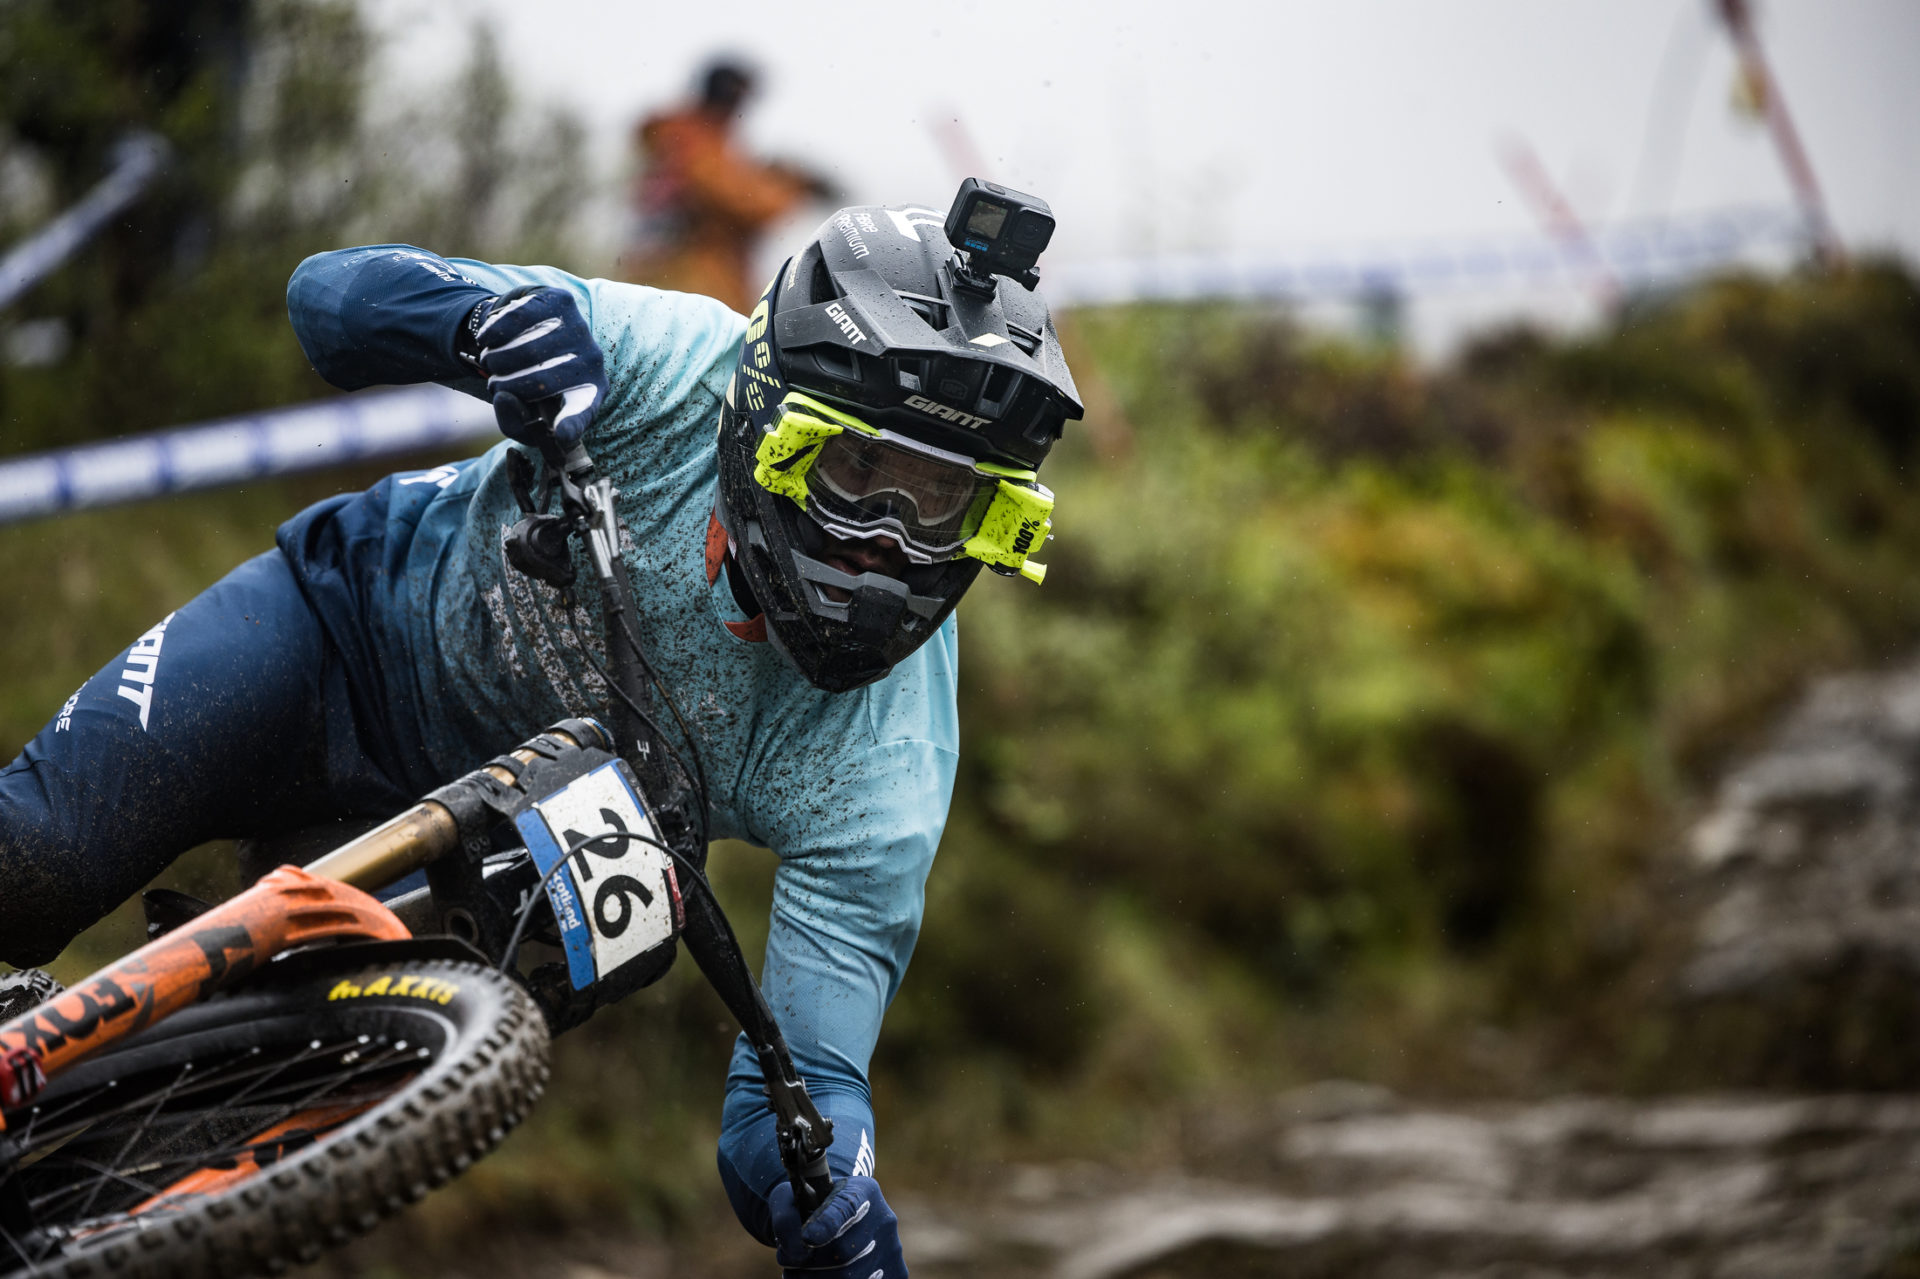 Giant Factory racer staring down the Fort William course